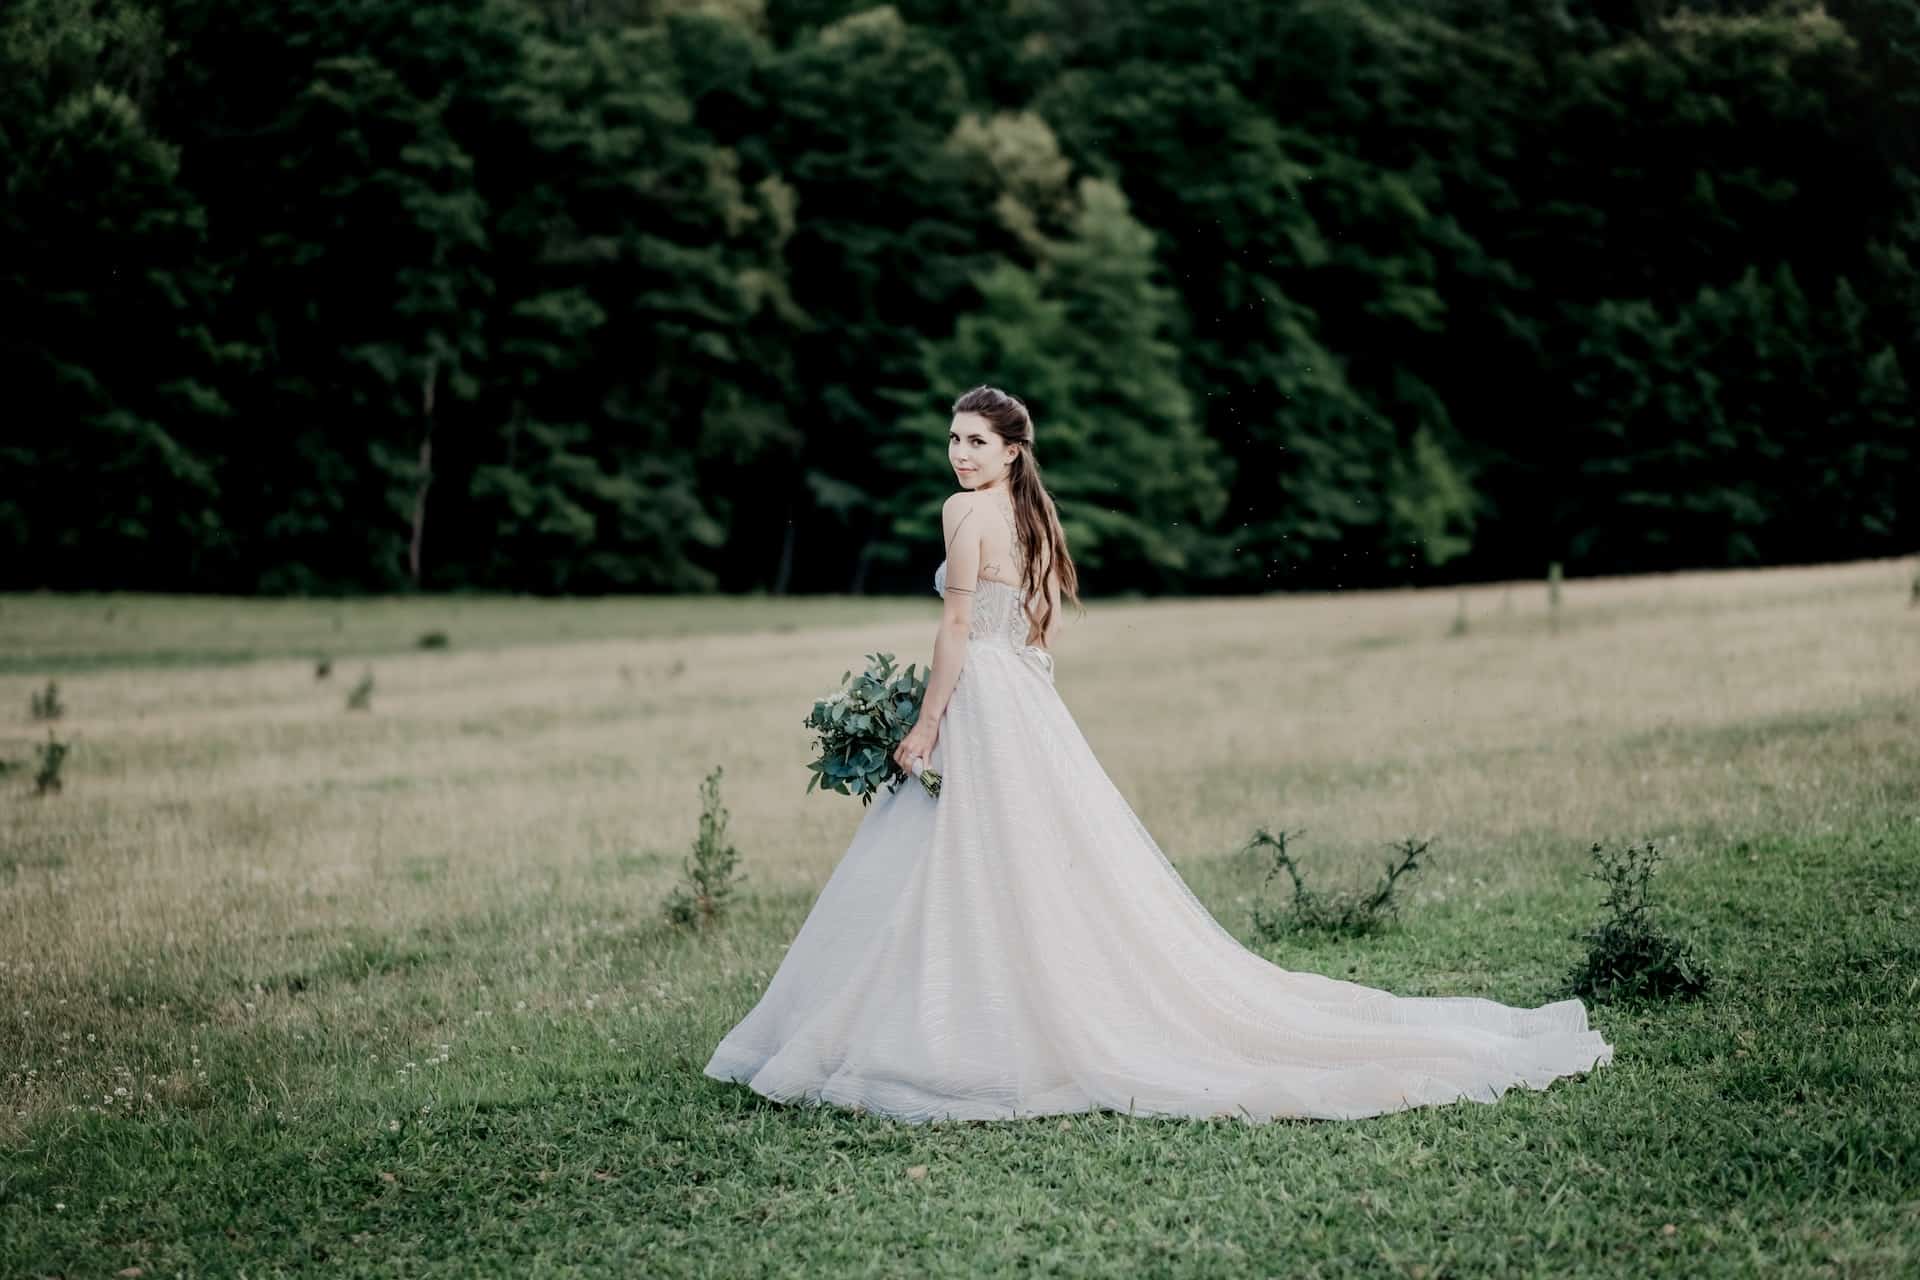 Looking for the Perfect Wedding Dress? Check Out the Latest Trends